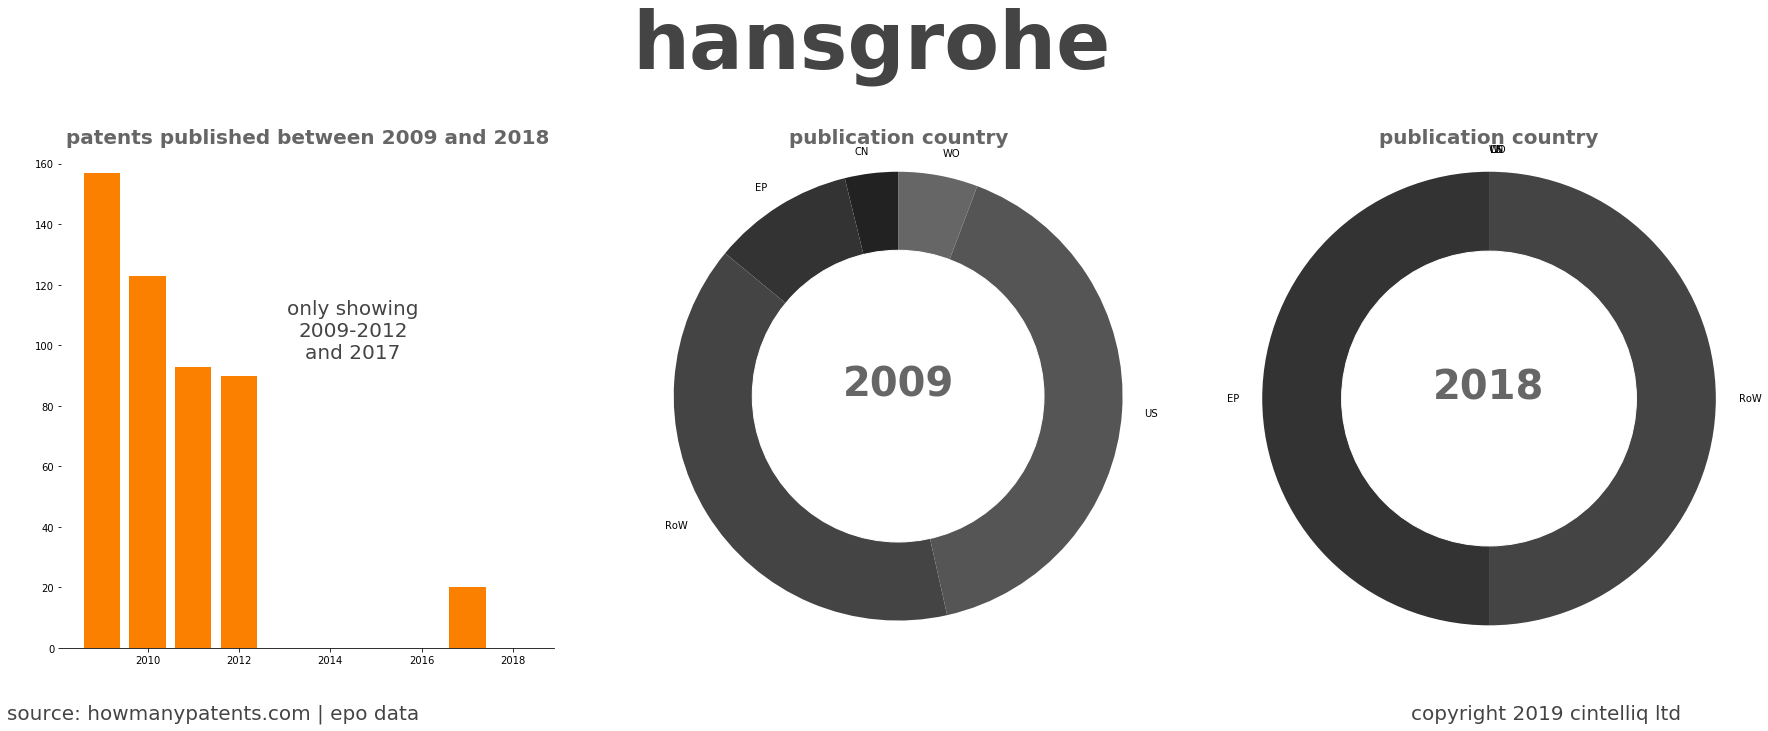 summary of patents for Hansgrohe